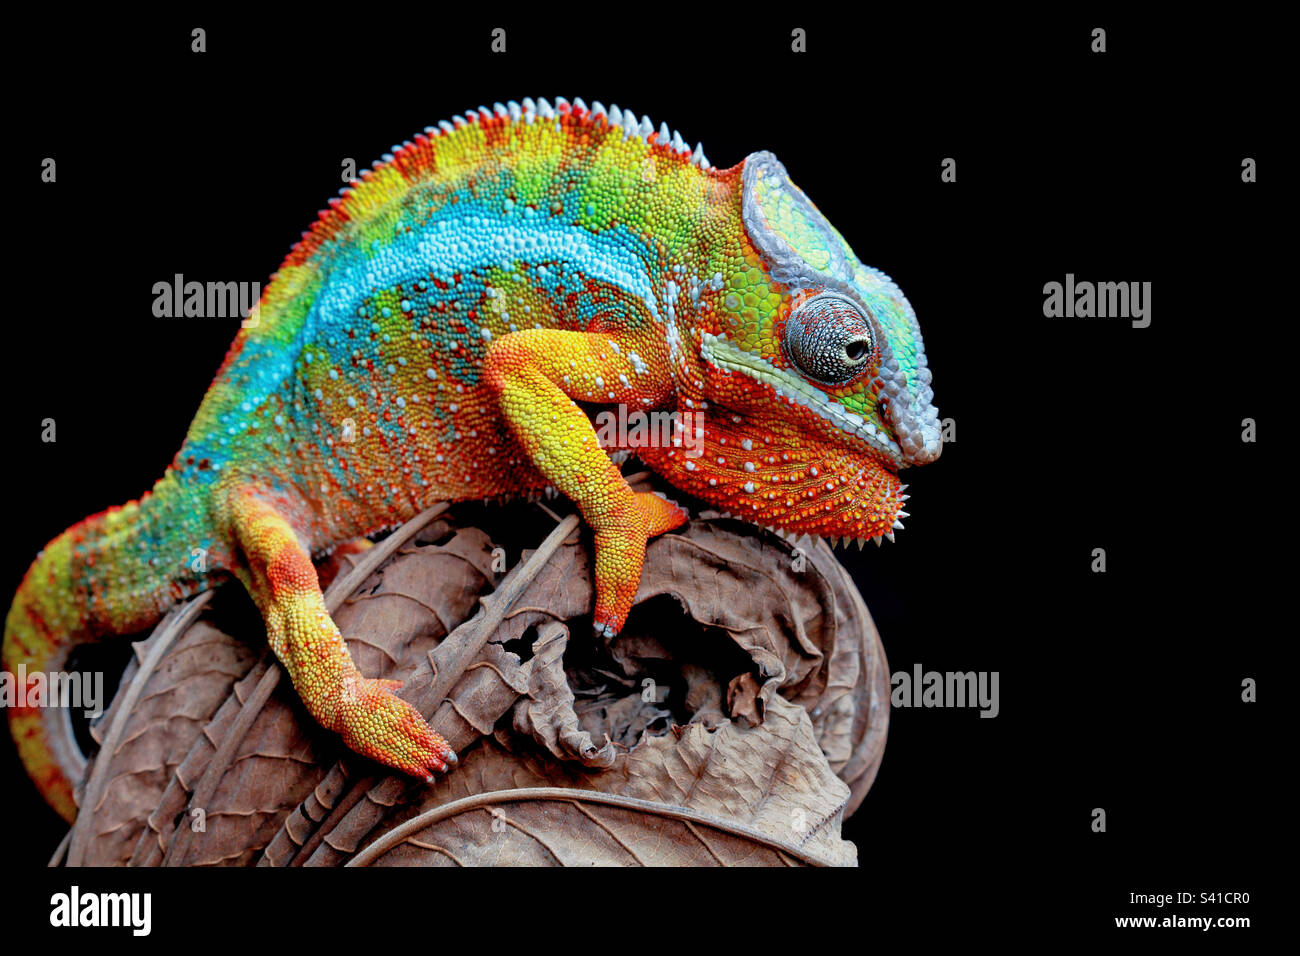 the beauty of the color of a chameleon on a dry leaf Stock Photo - Alamy